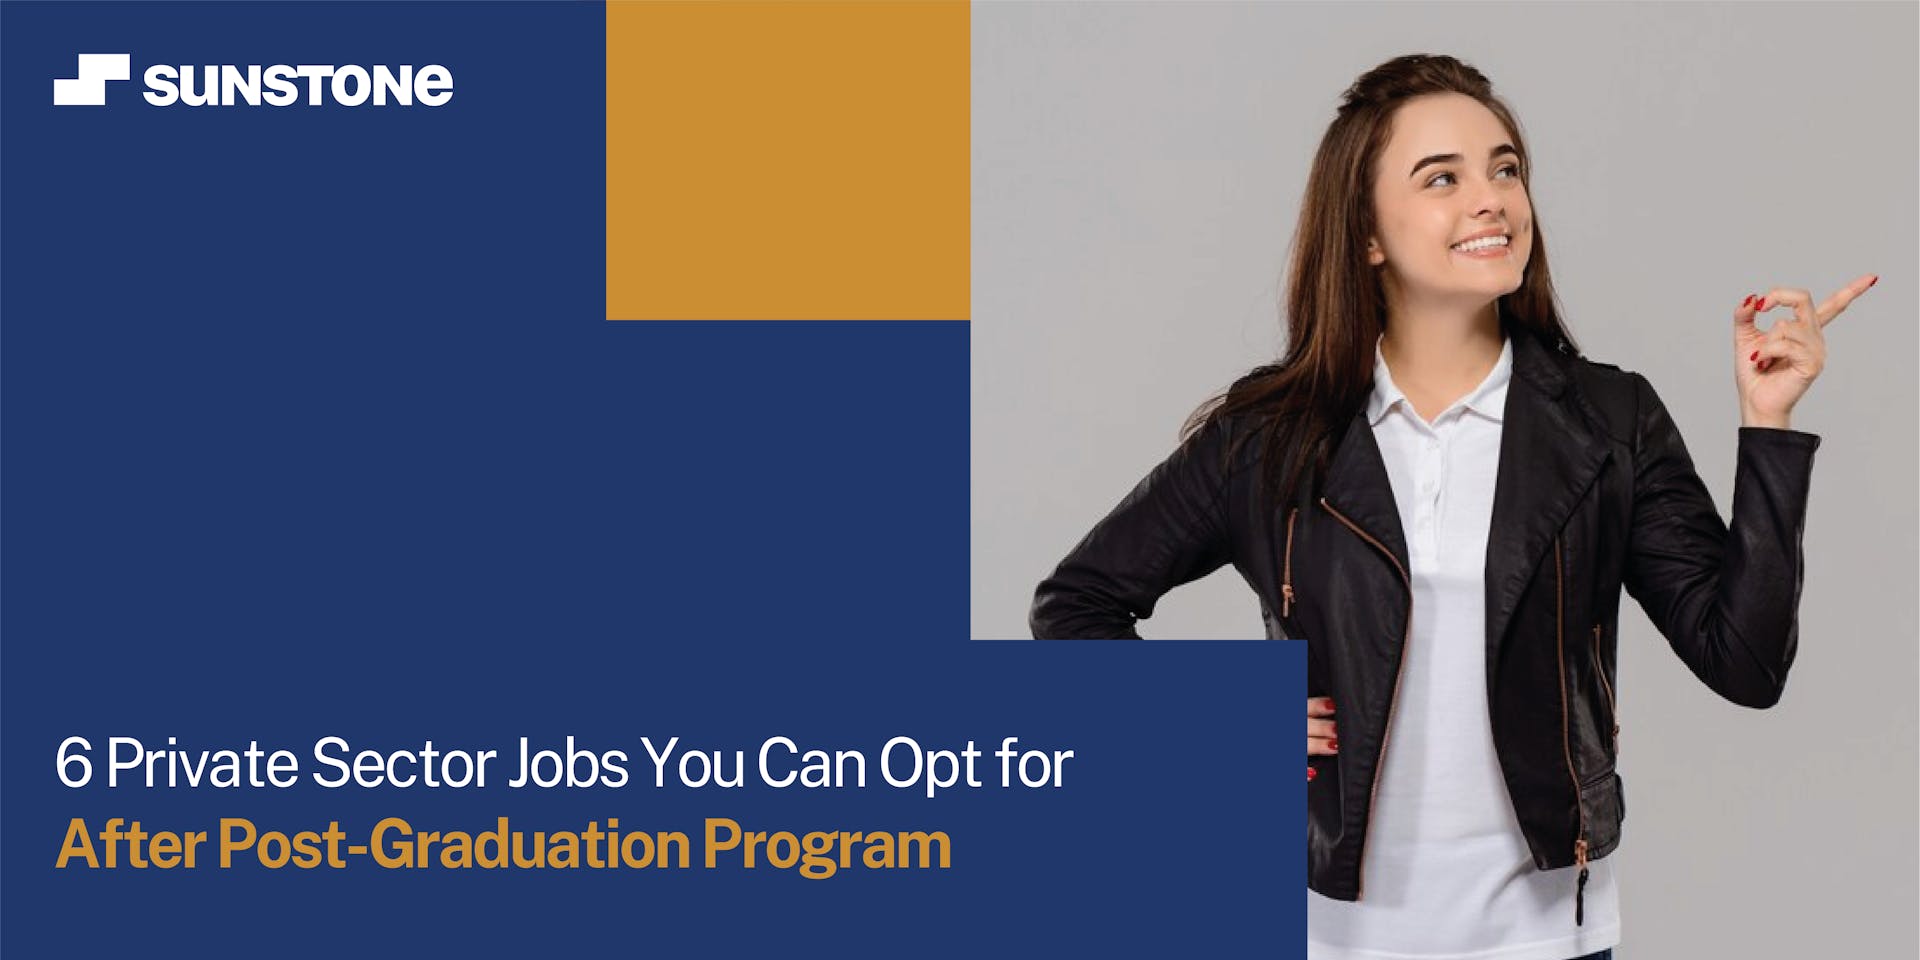 6 Private Sector Jobs You Can Opt for After Post-Graduation Program